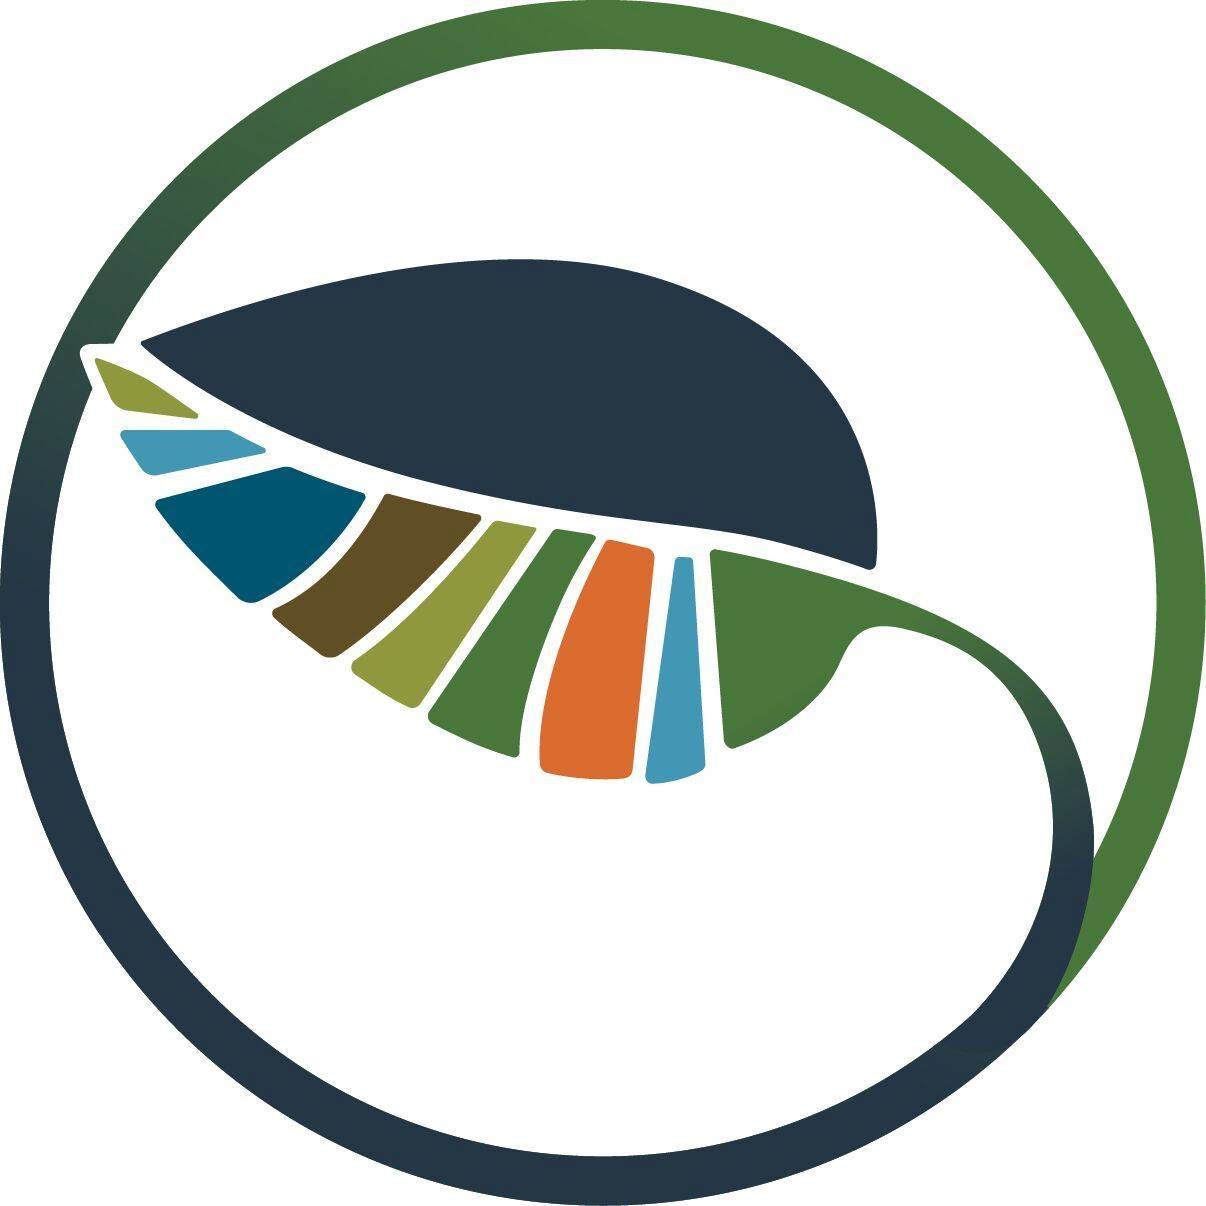 Business logo of Wolfe's Neck Center for Agriculture & the Environment